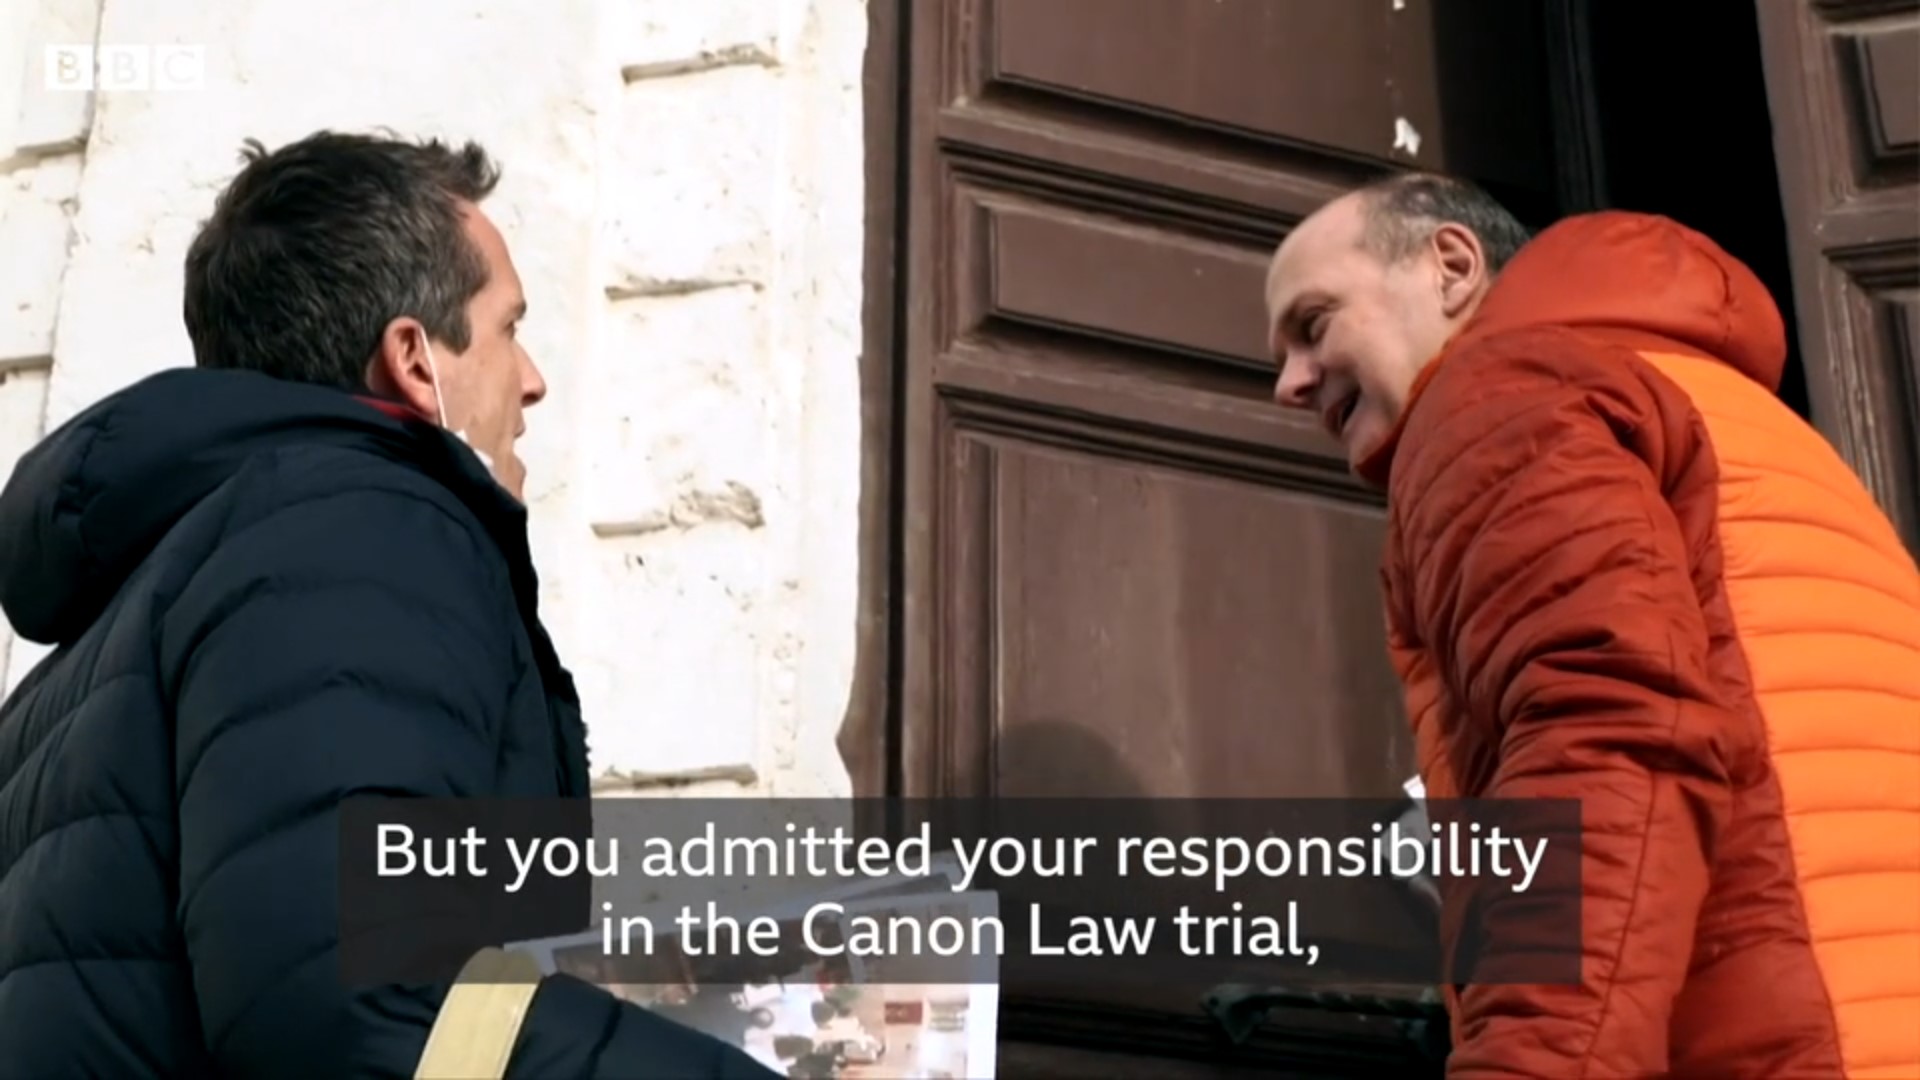 Reporter Mark Lowen interviews Rev. Gianni Bekiaris about his canonical trial. Screen image from BBC report.